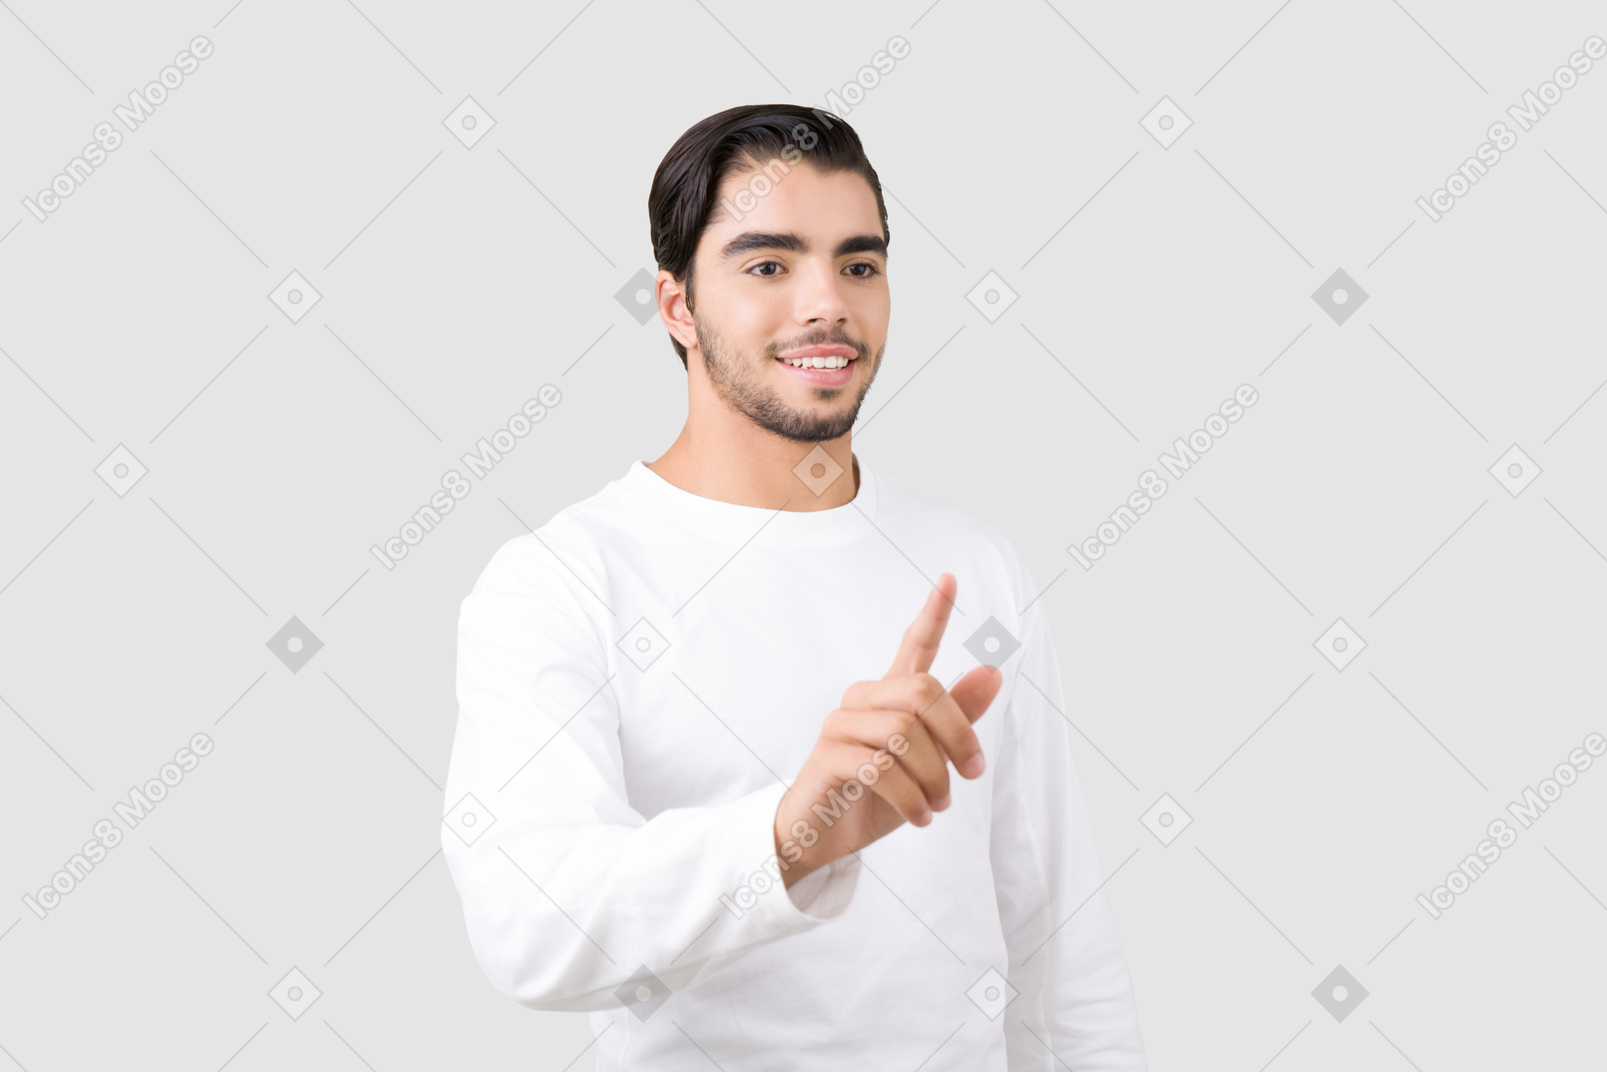 Handsome young man with light smile pointing at something